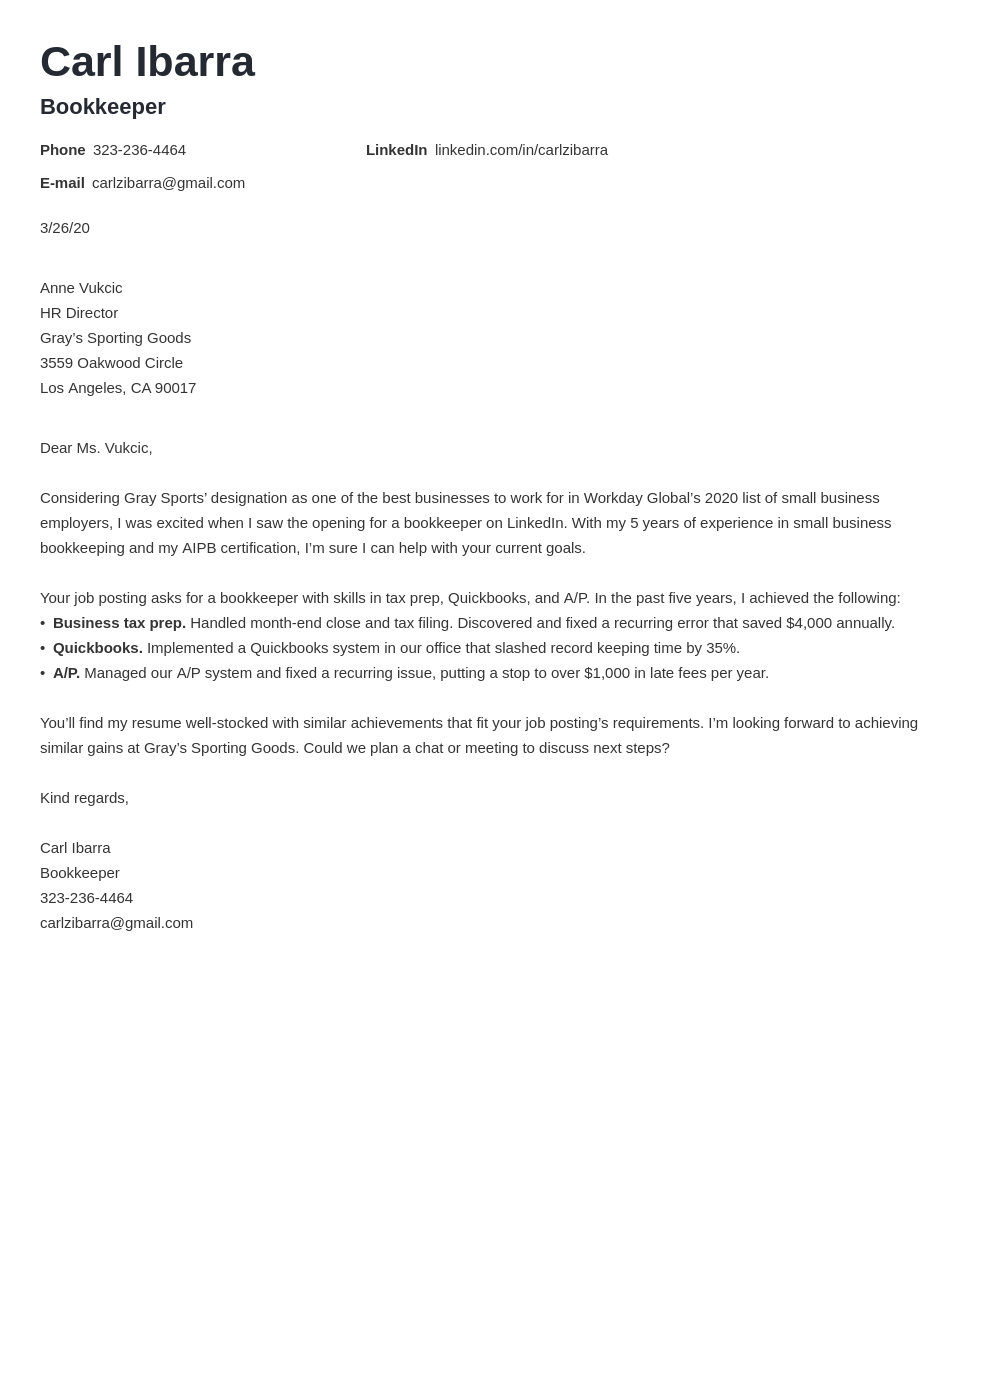 application letter about bookstore